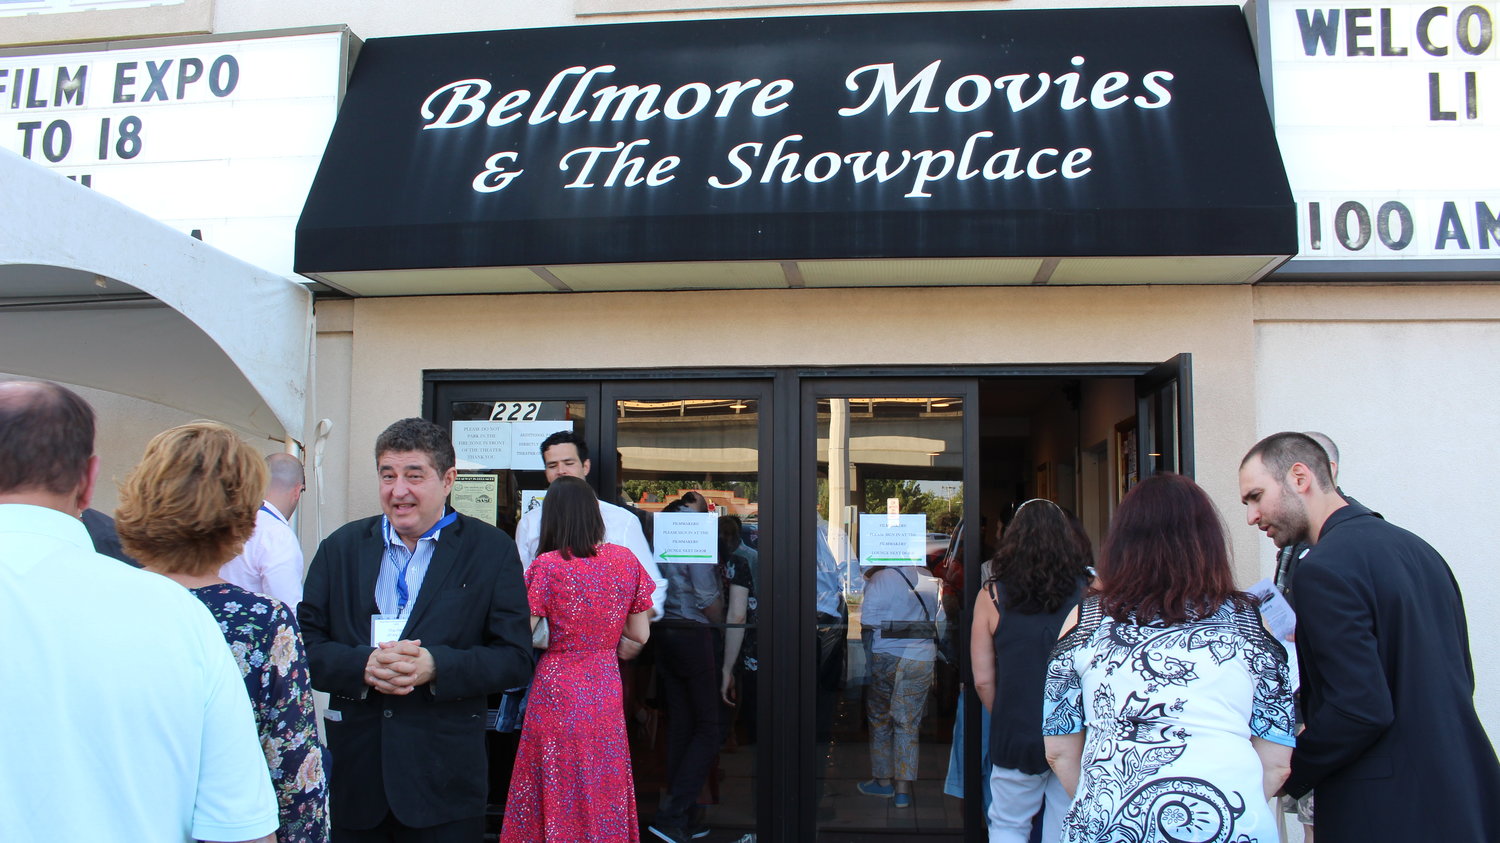 LIIFE brought filmmakers and moviegoers to the Bellmore Movies July 12-19.